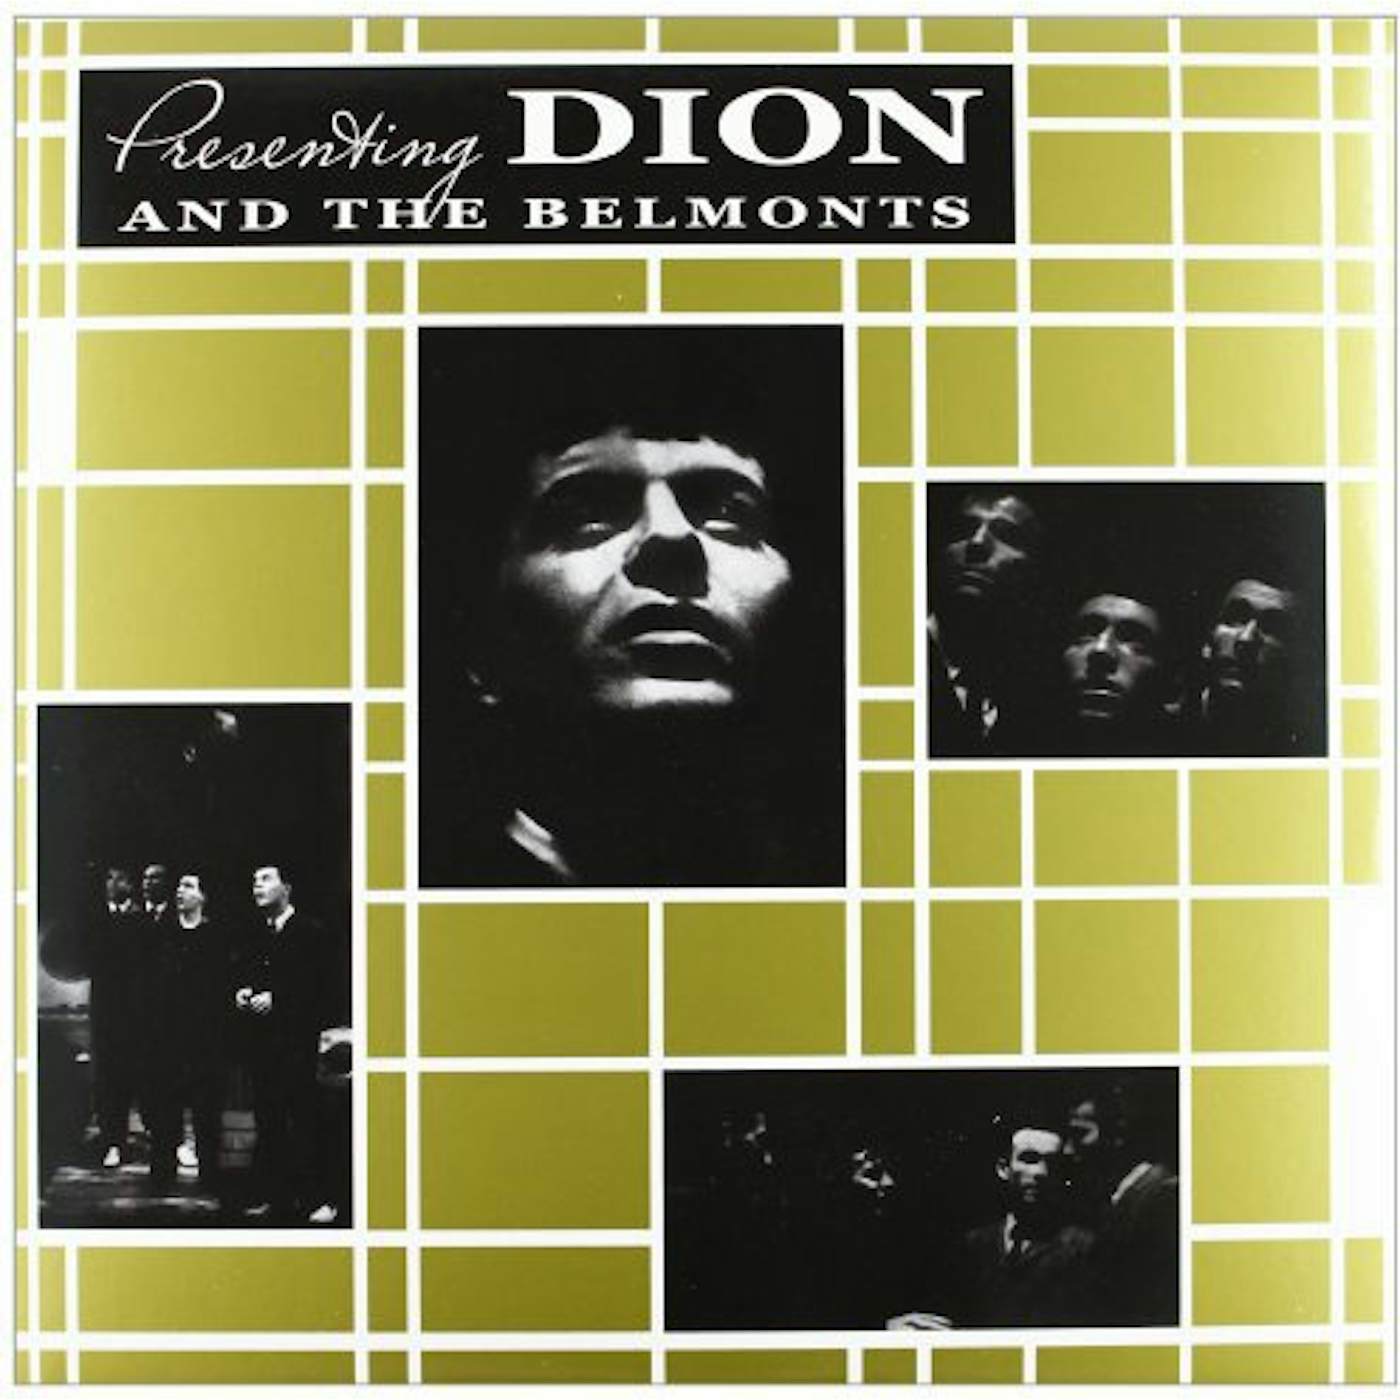 Presenting Dion & The Belmonts Vinyl Record